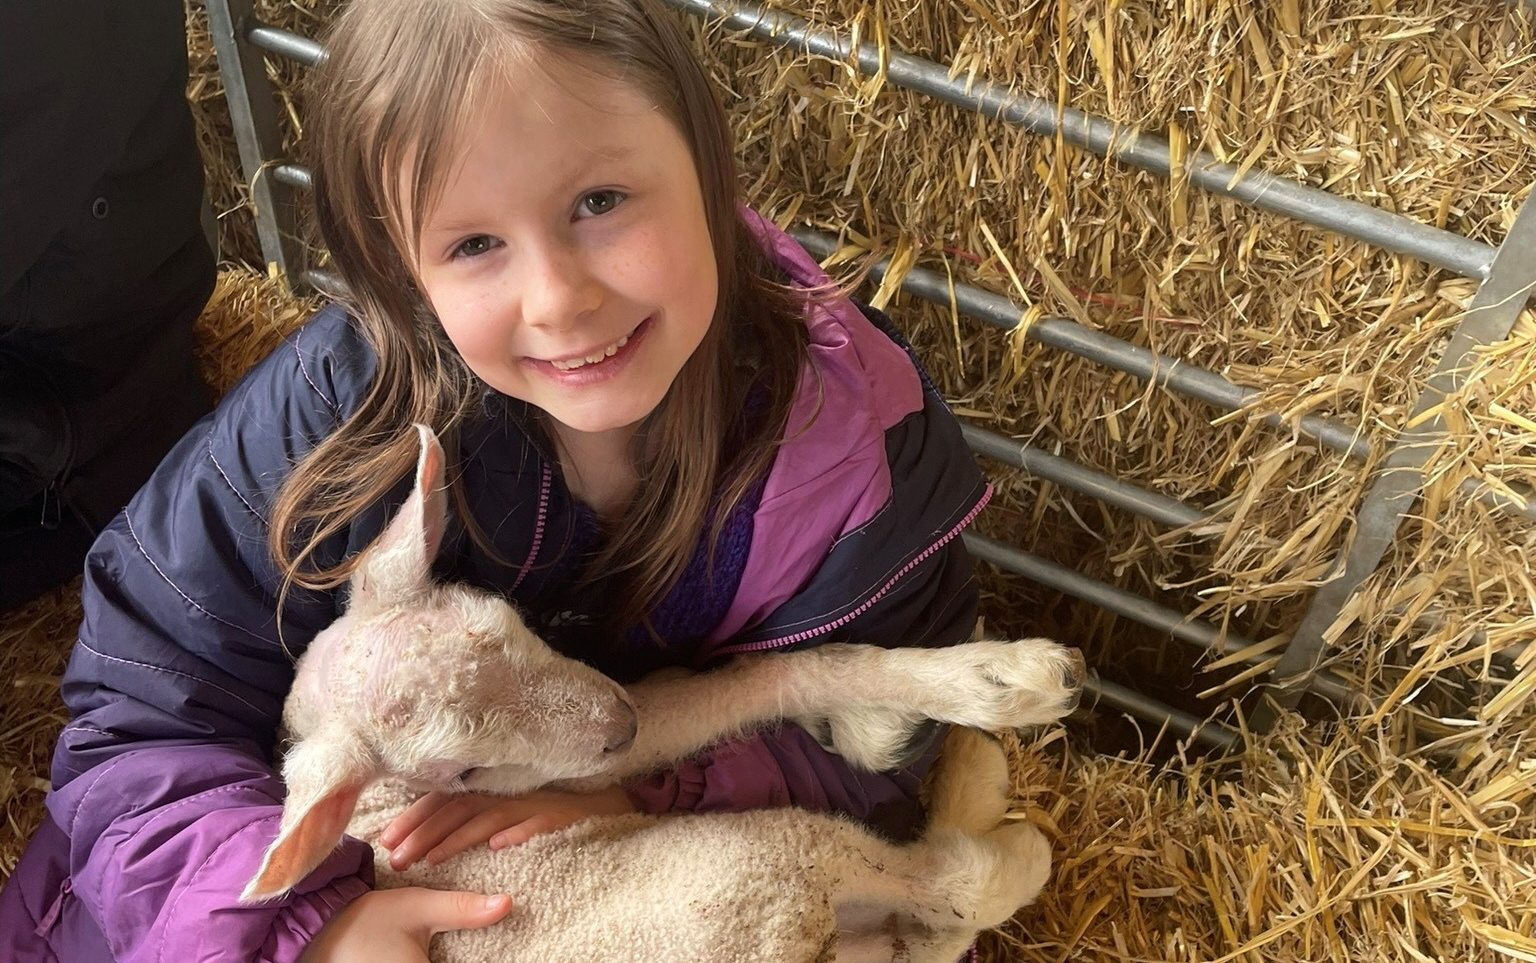 parents could sue petting farm after 20 people fell ill after visit over easter